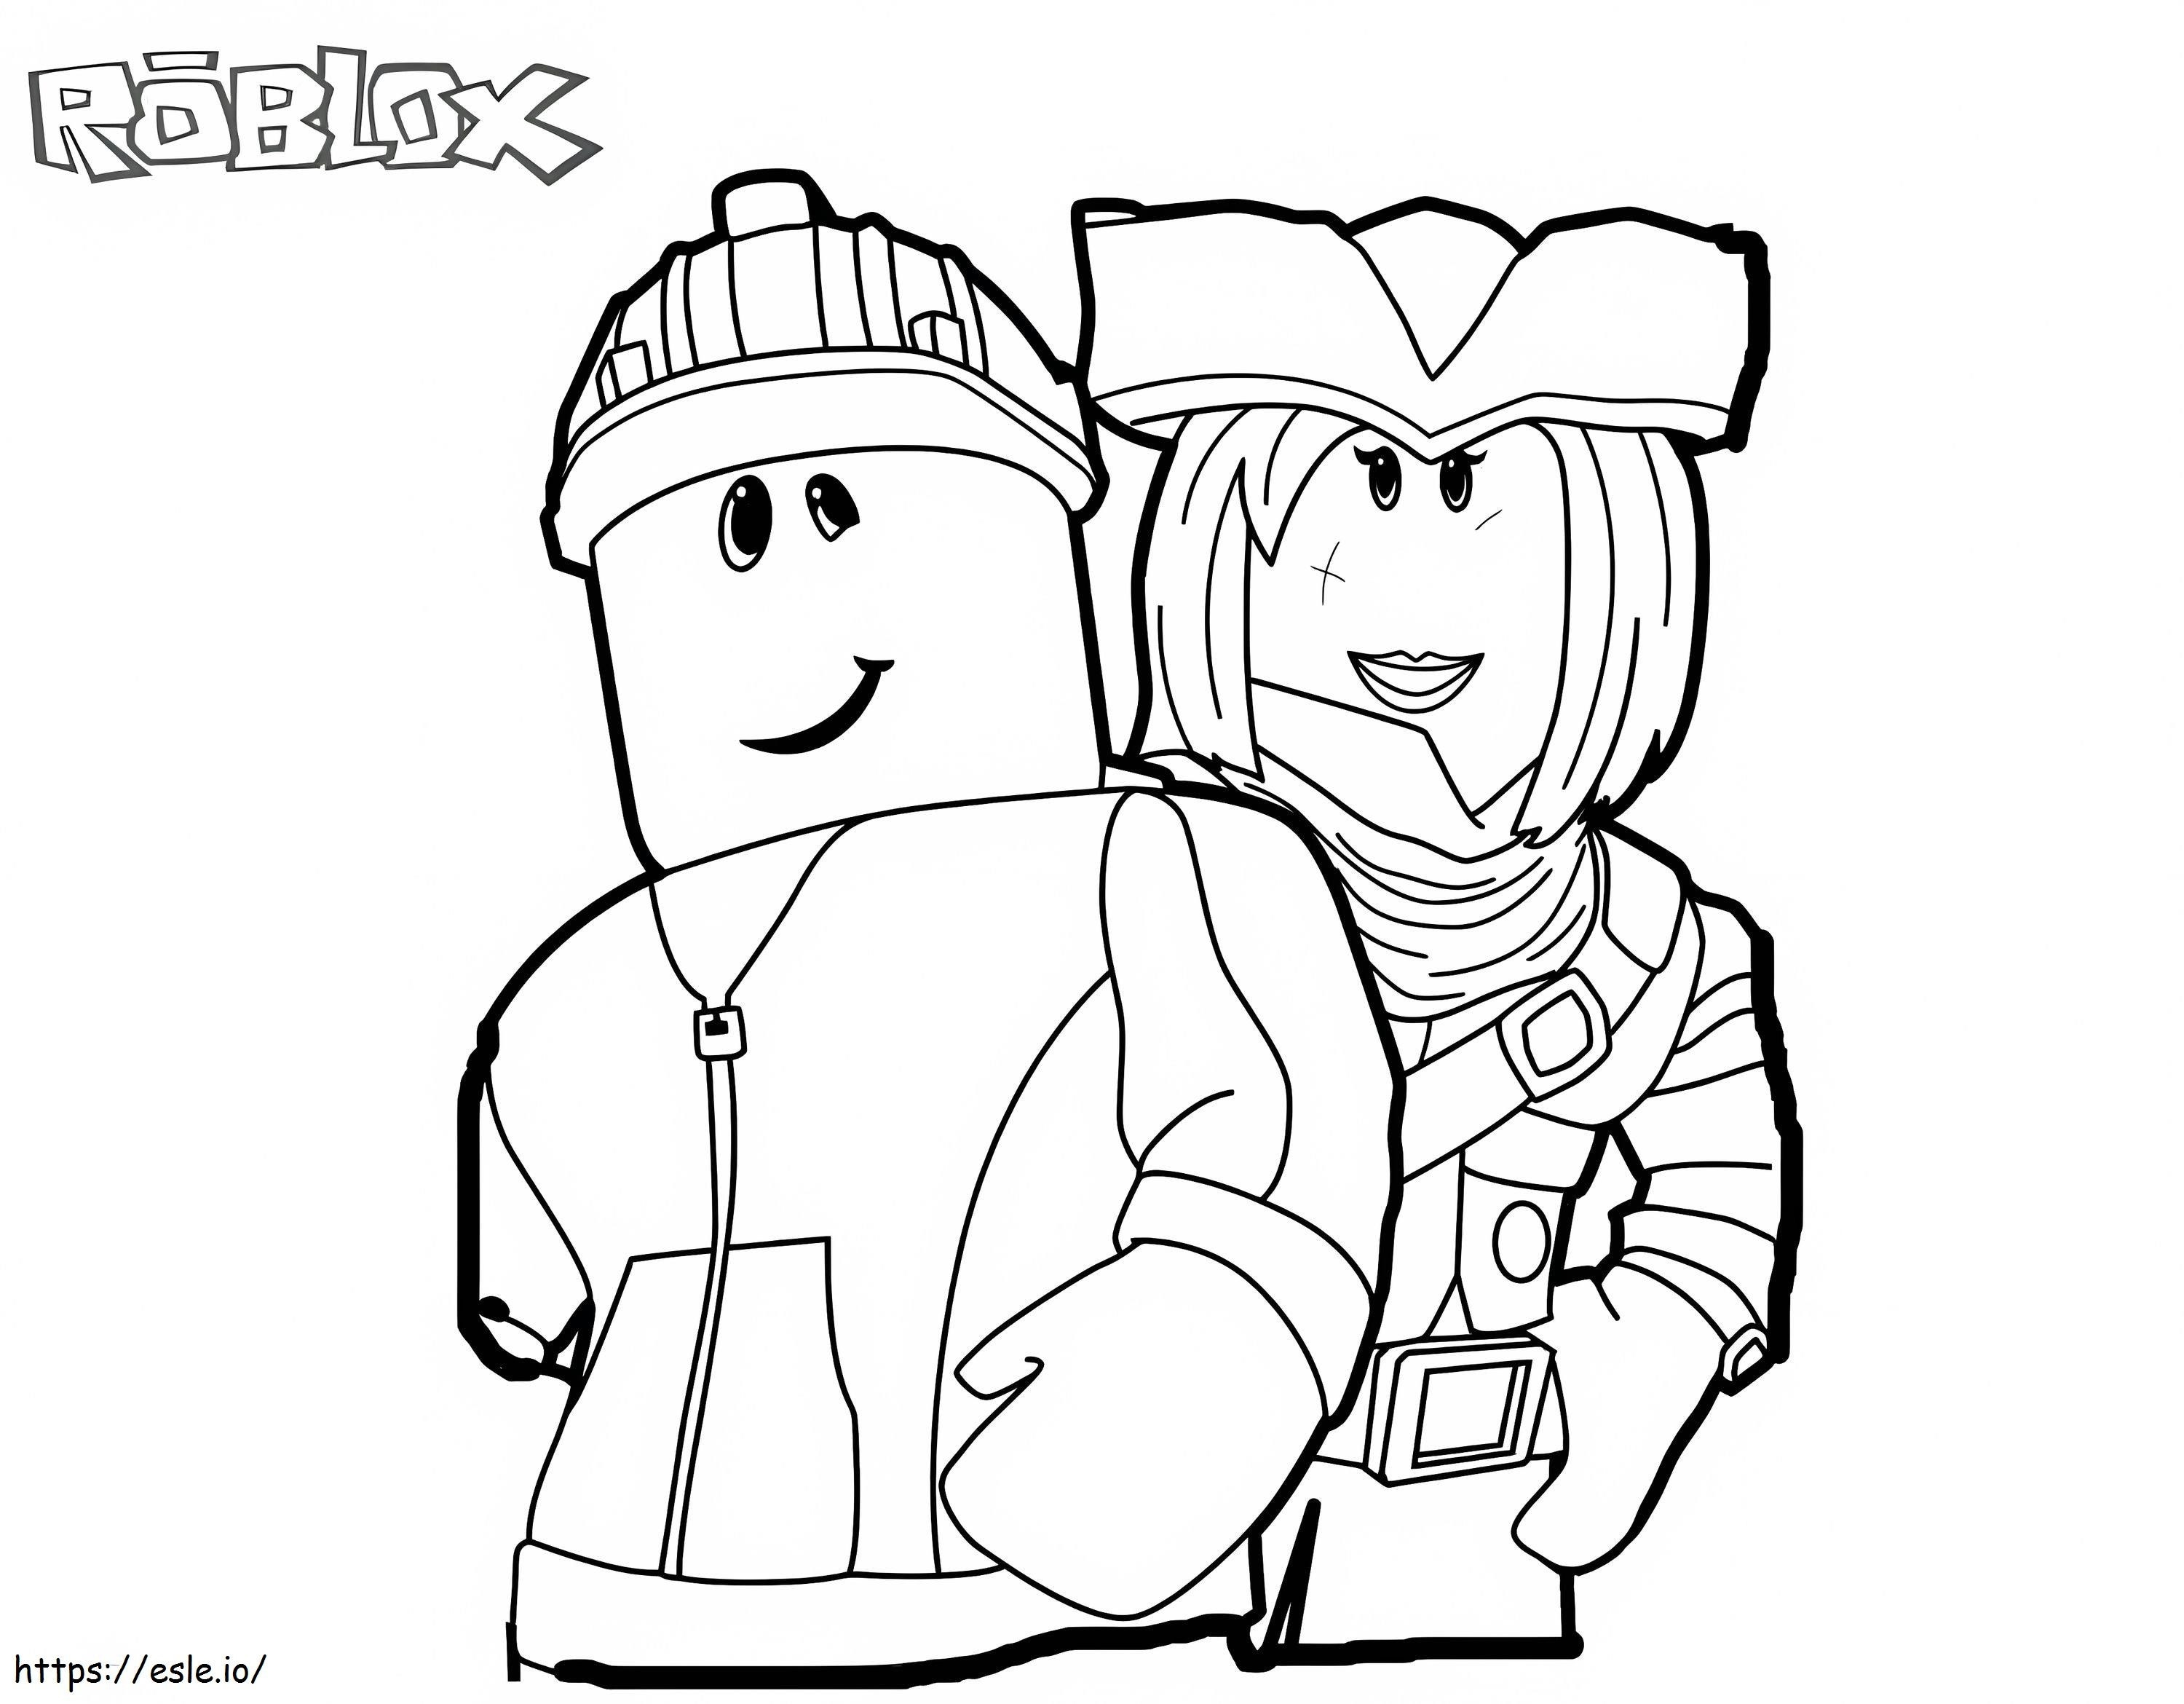 Roblox With Two Characters coloring page